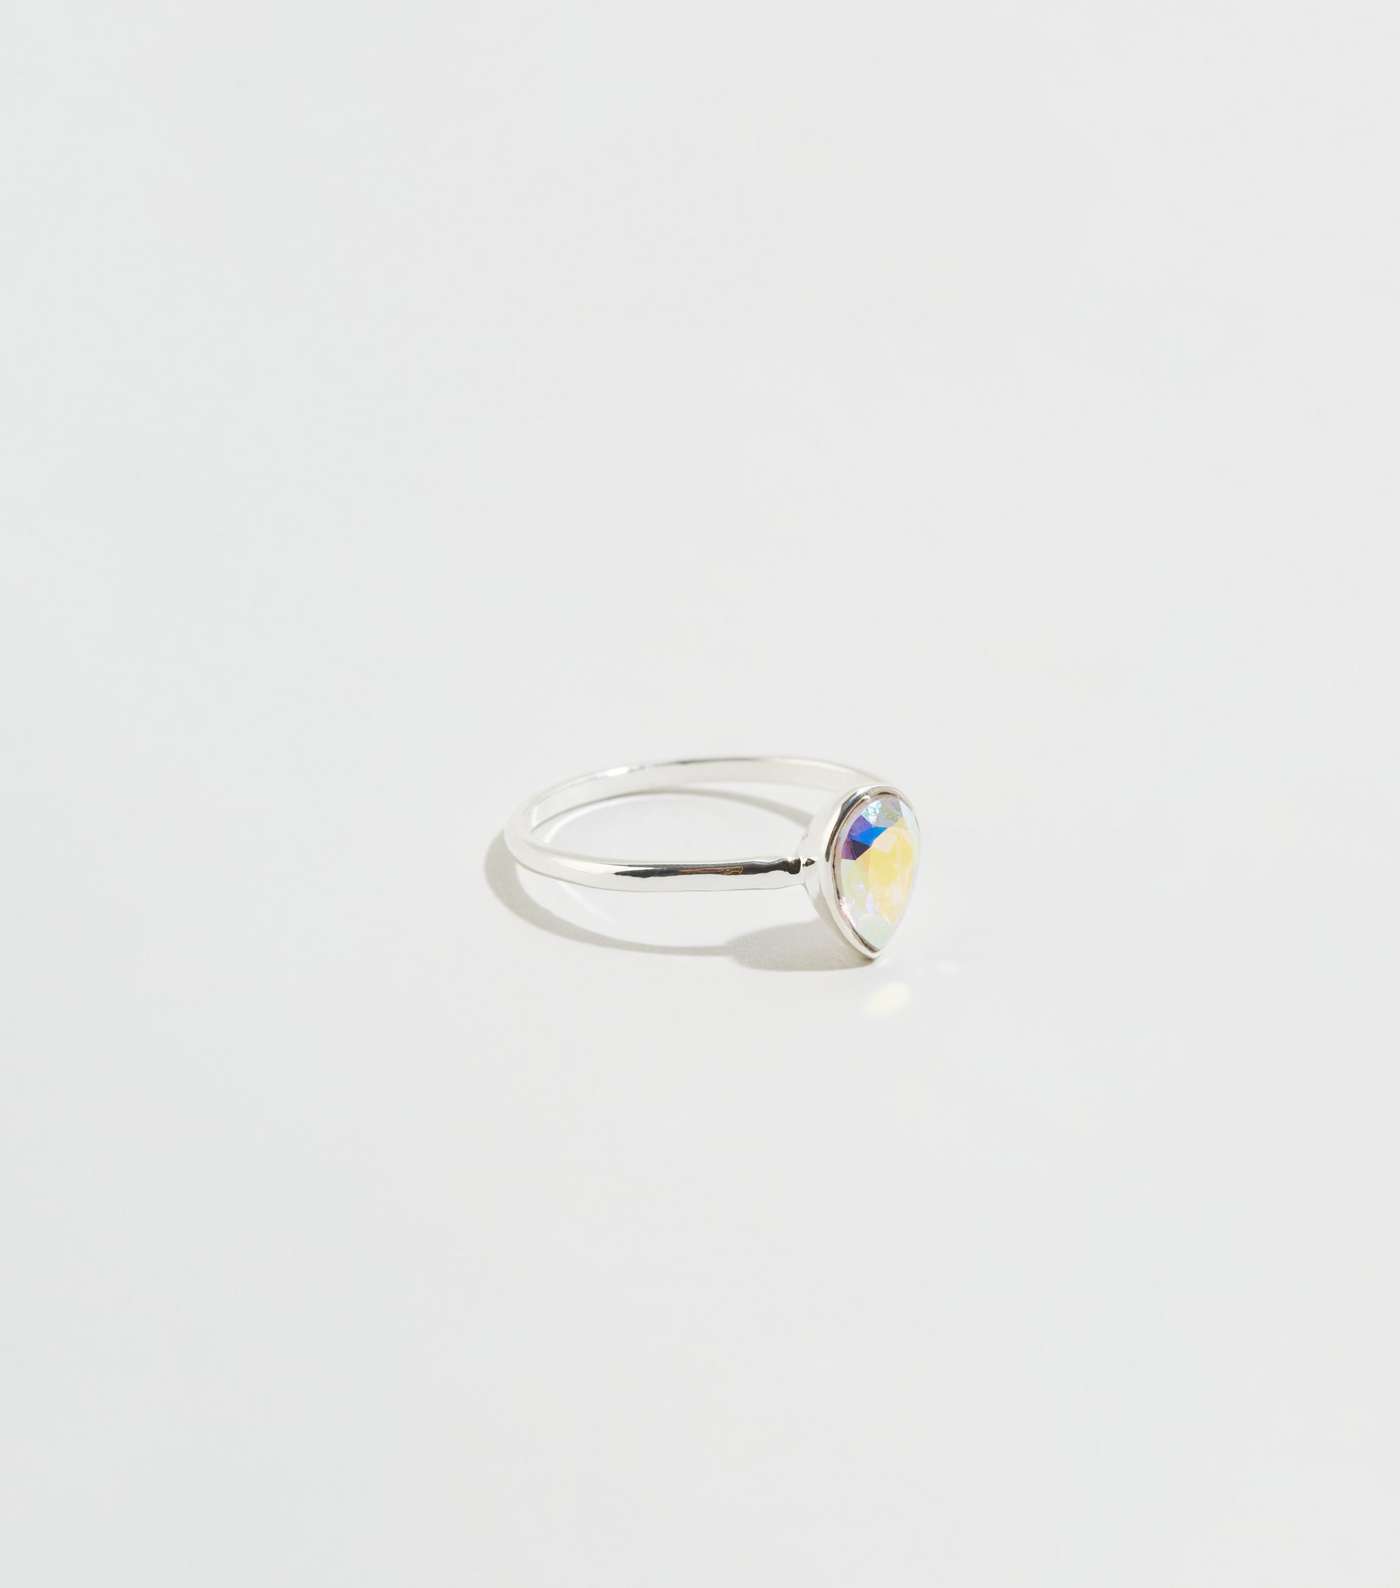 Silver Teardrop Ring with Crystals from Swarovski® Image 2